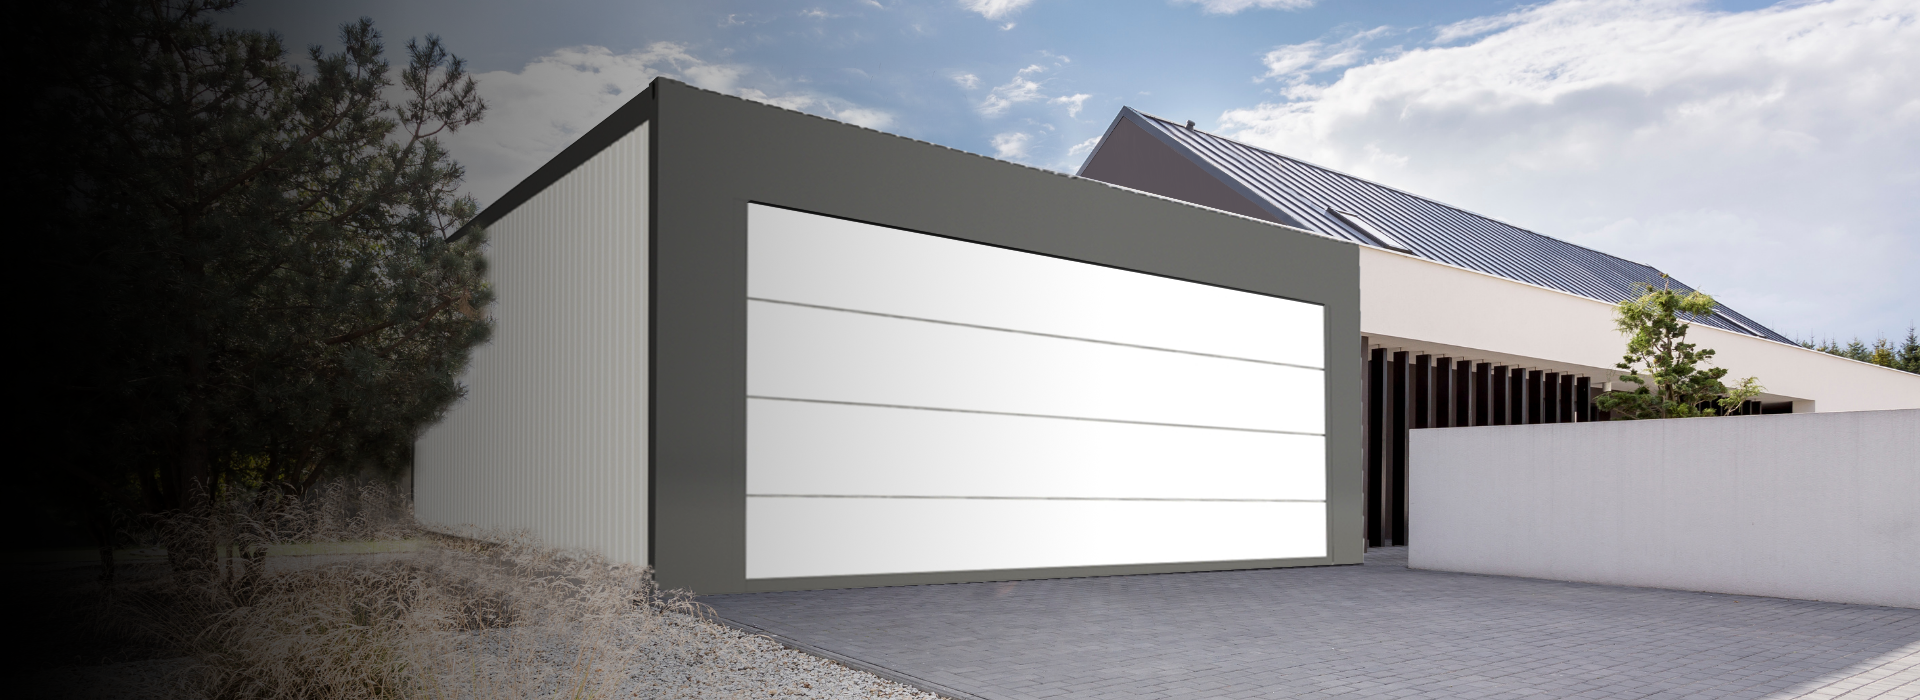 Adaptation of container garages into workshops and storage rooms | Ultramodula